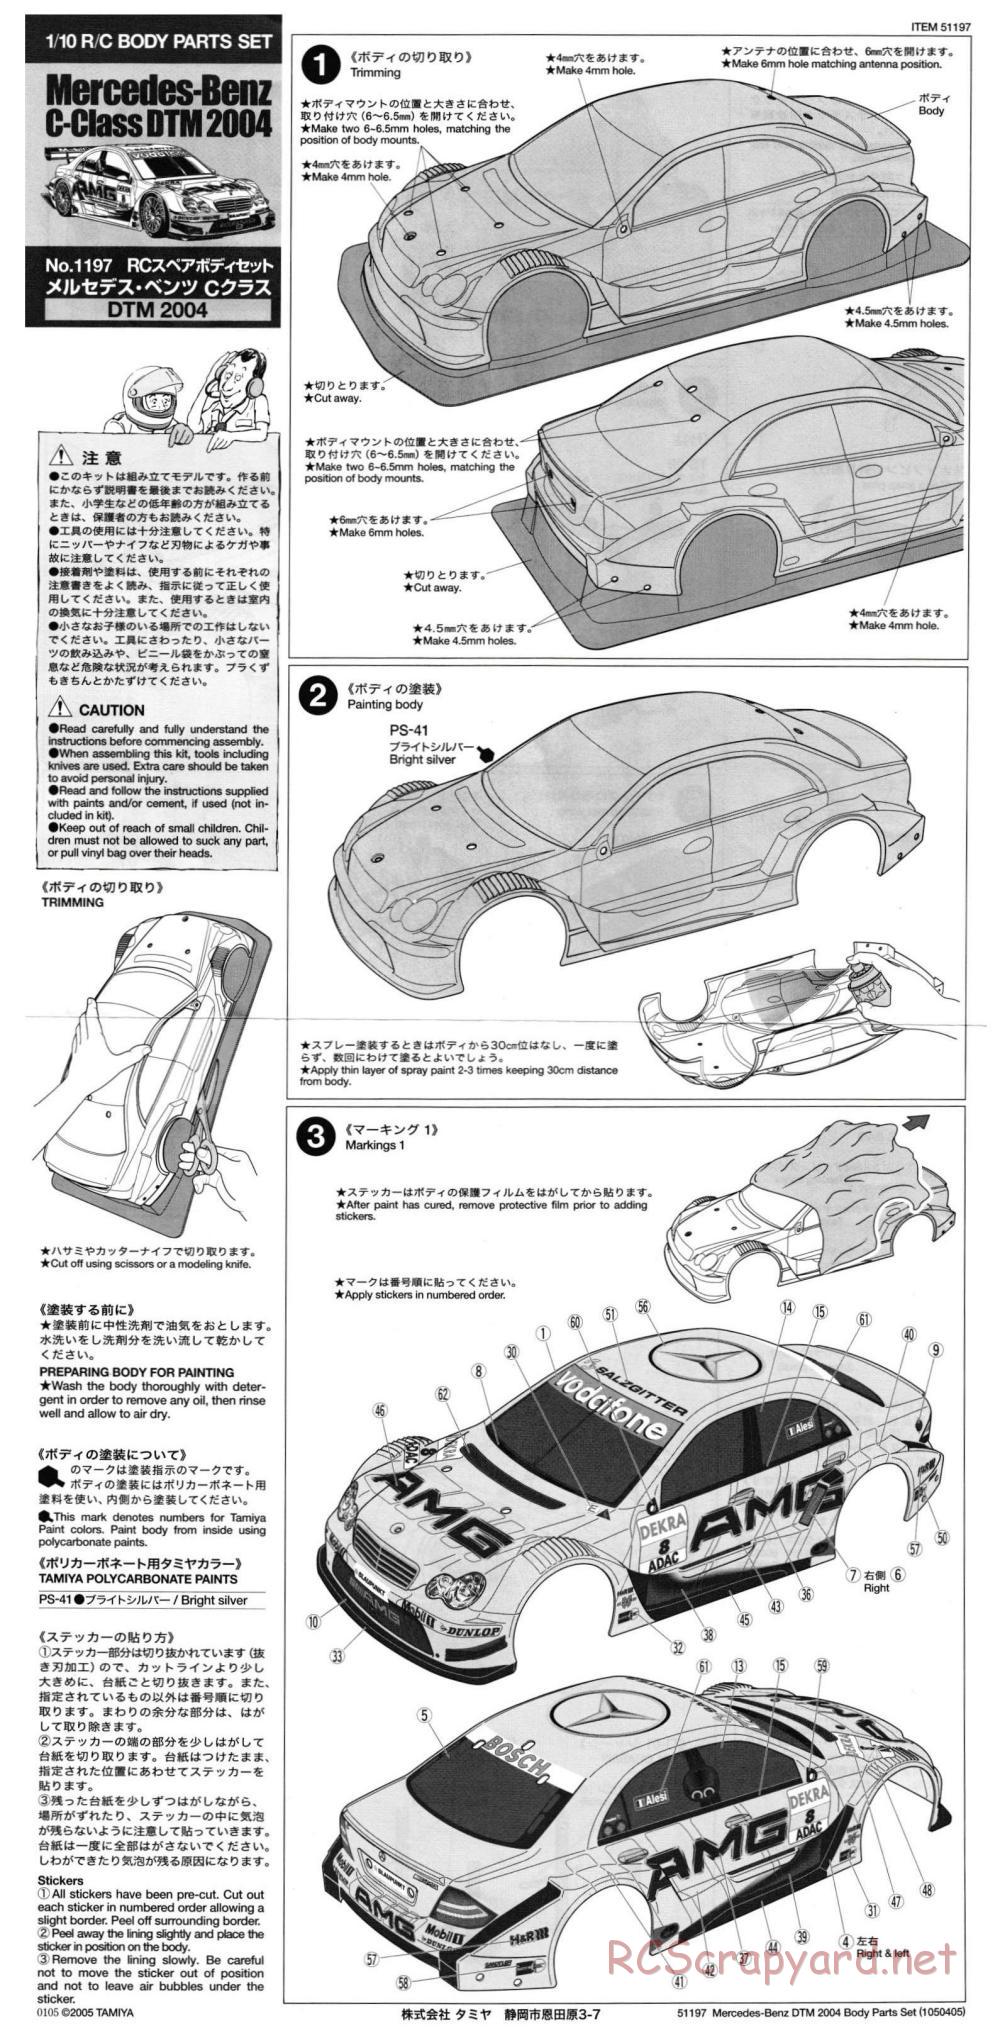 Tamiya - Mercedes Benz C-Class DTM 2004 - TA05 Chassis - Body Manual - Page 1